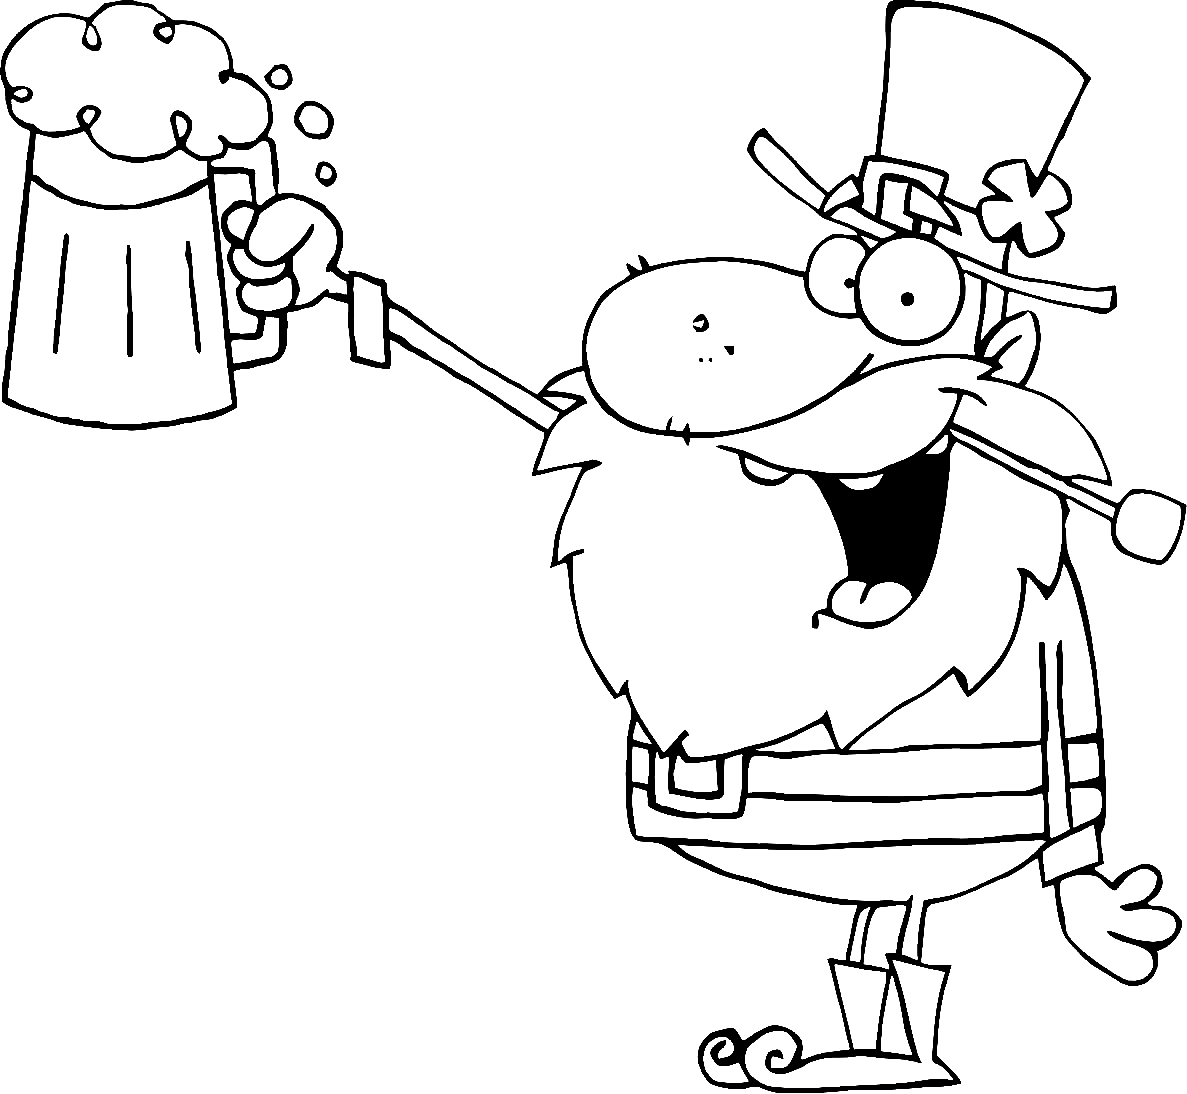 Lucky Leprechaun Toasting with a Mug of Beer Coloring Page